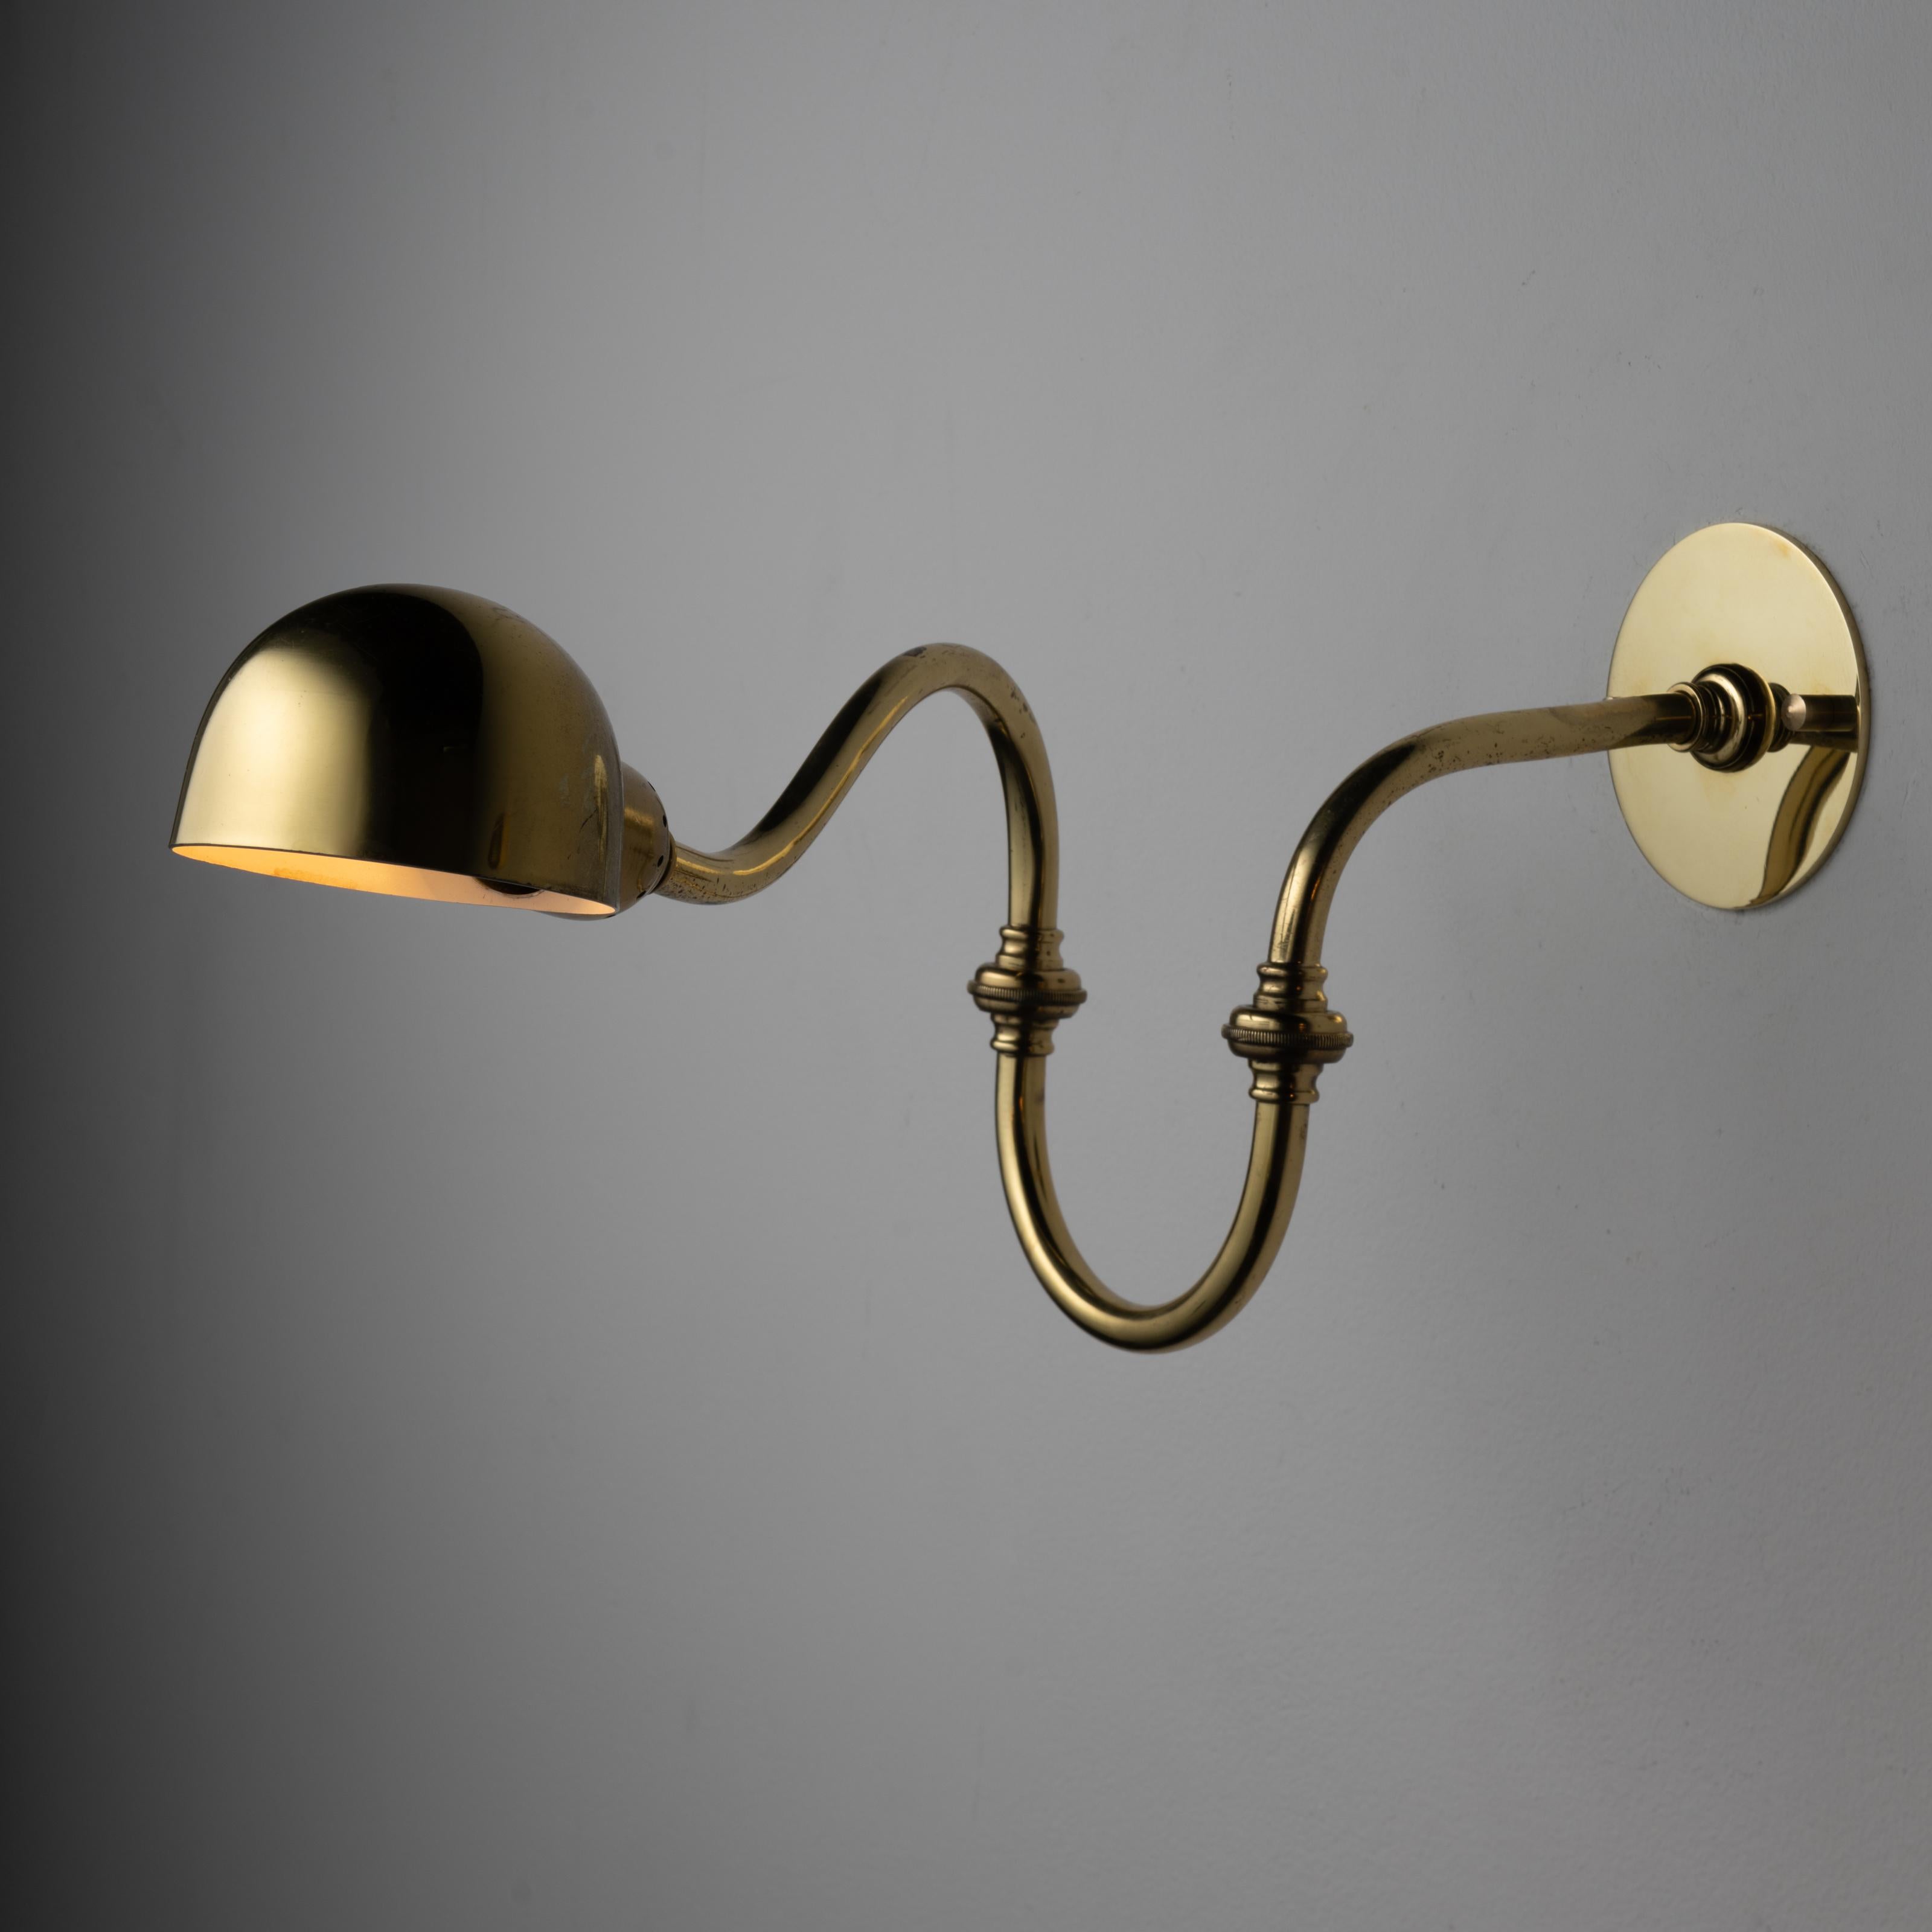 Enameled Pair of LP15 Tromba Wall Lamps by Luigi Caccia Dominioni for Azucena